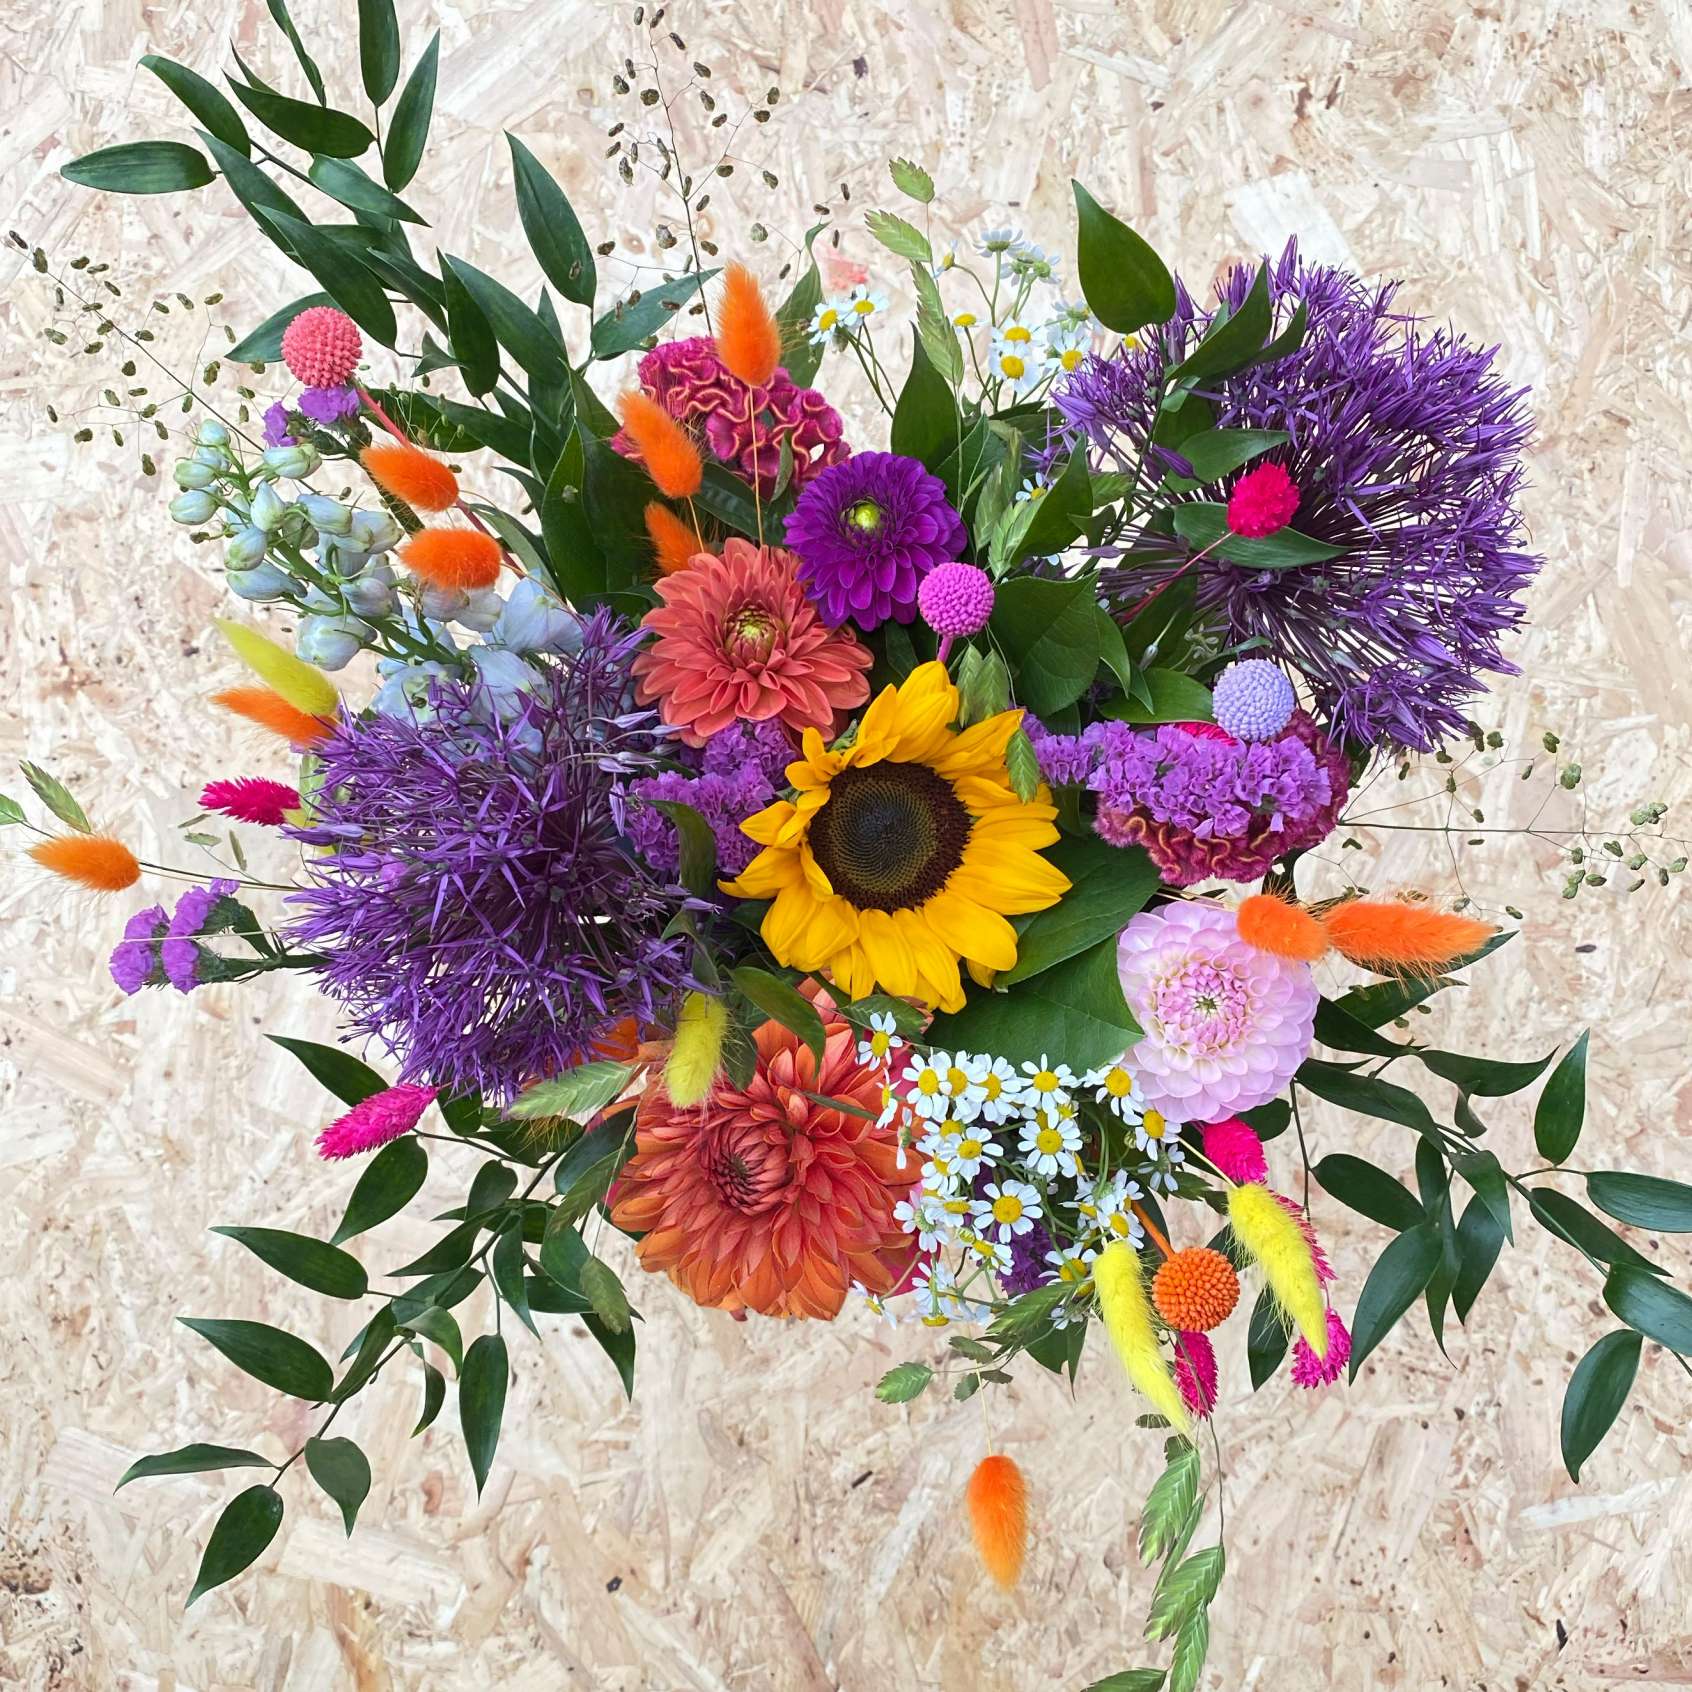 A vibrant hand-tied flower bouquet